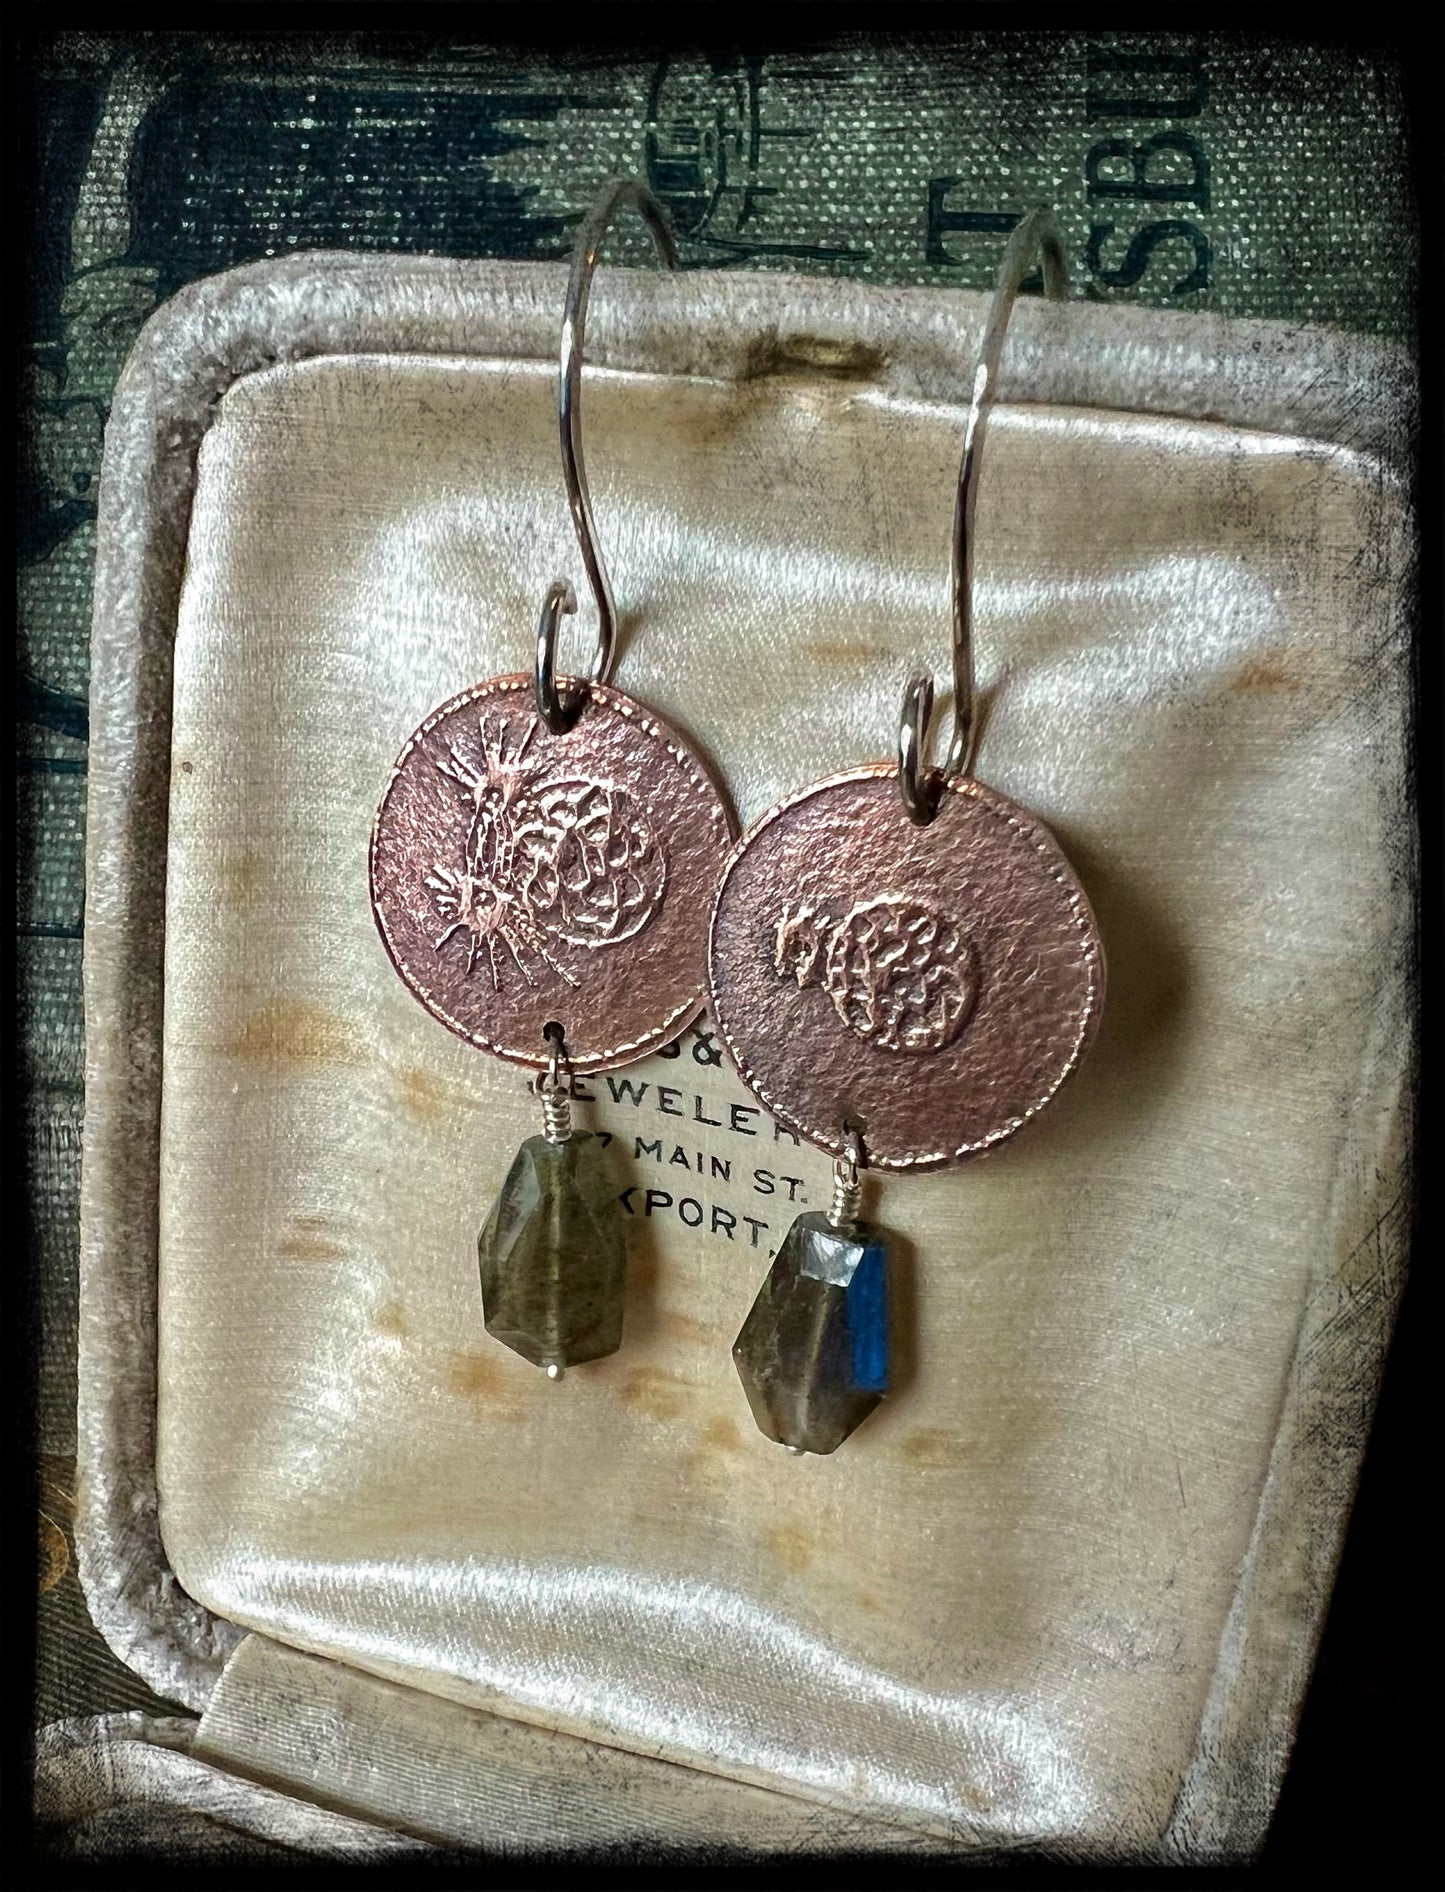 Copper Embossed Earrings with Labradorite Bead